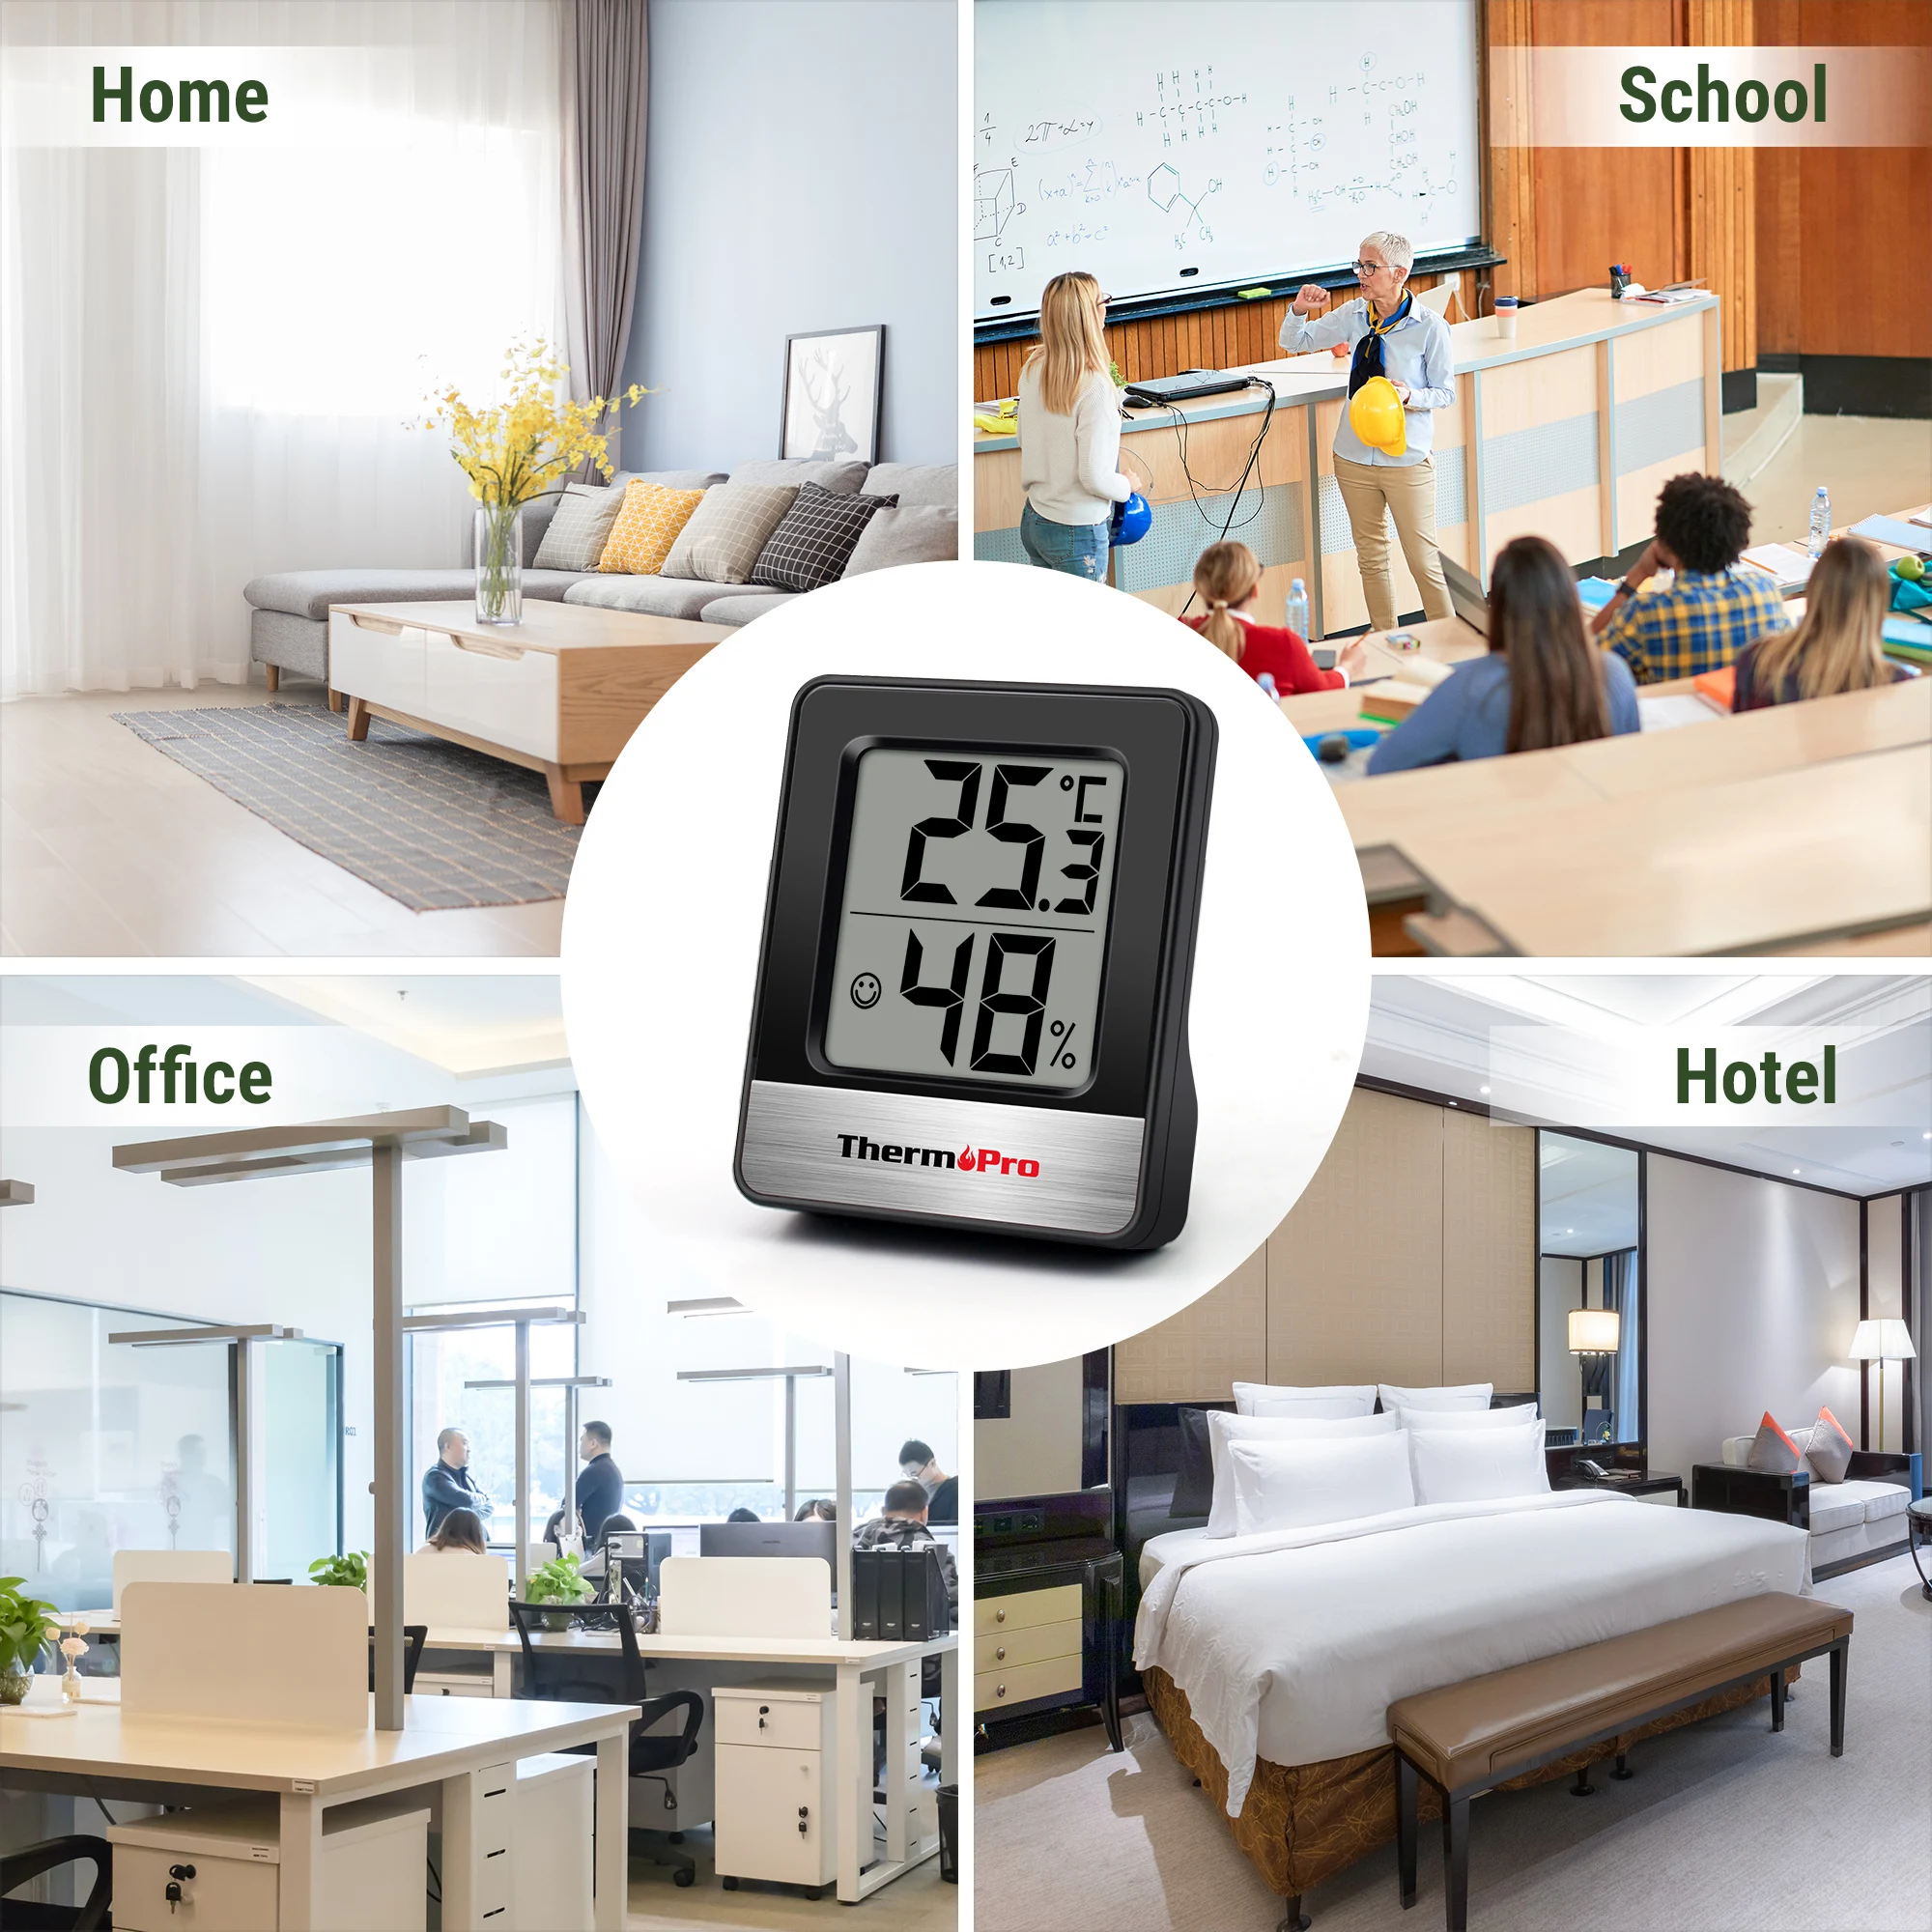 ThermoPro TP49 Mini Digital Indoor Room Thermometer Hygrometer For Home Weather Station Black White images - 6